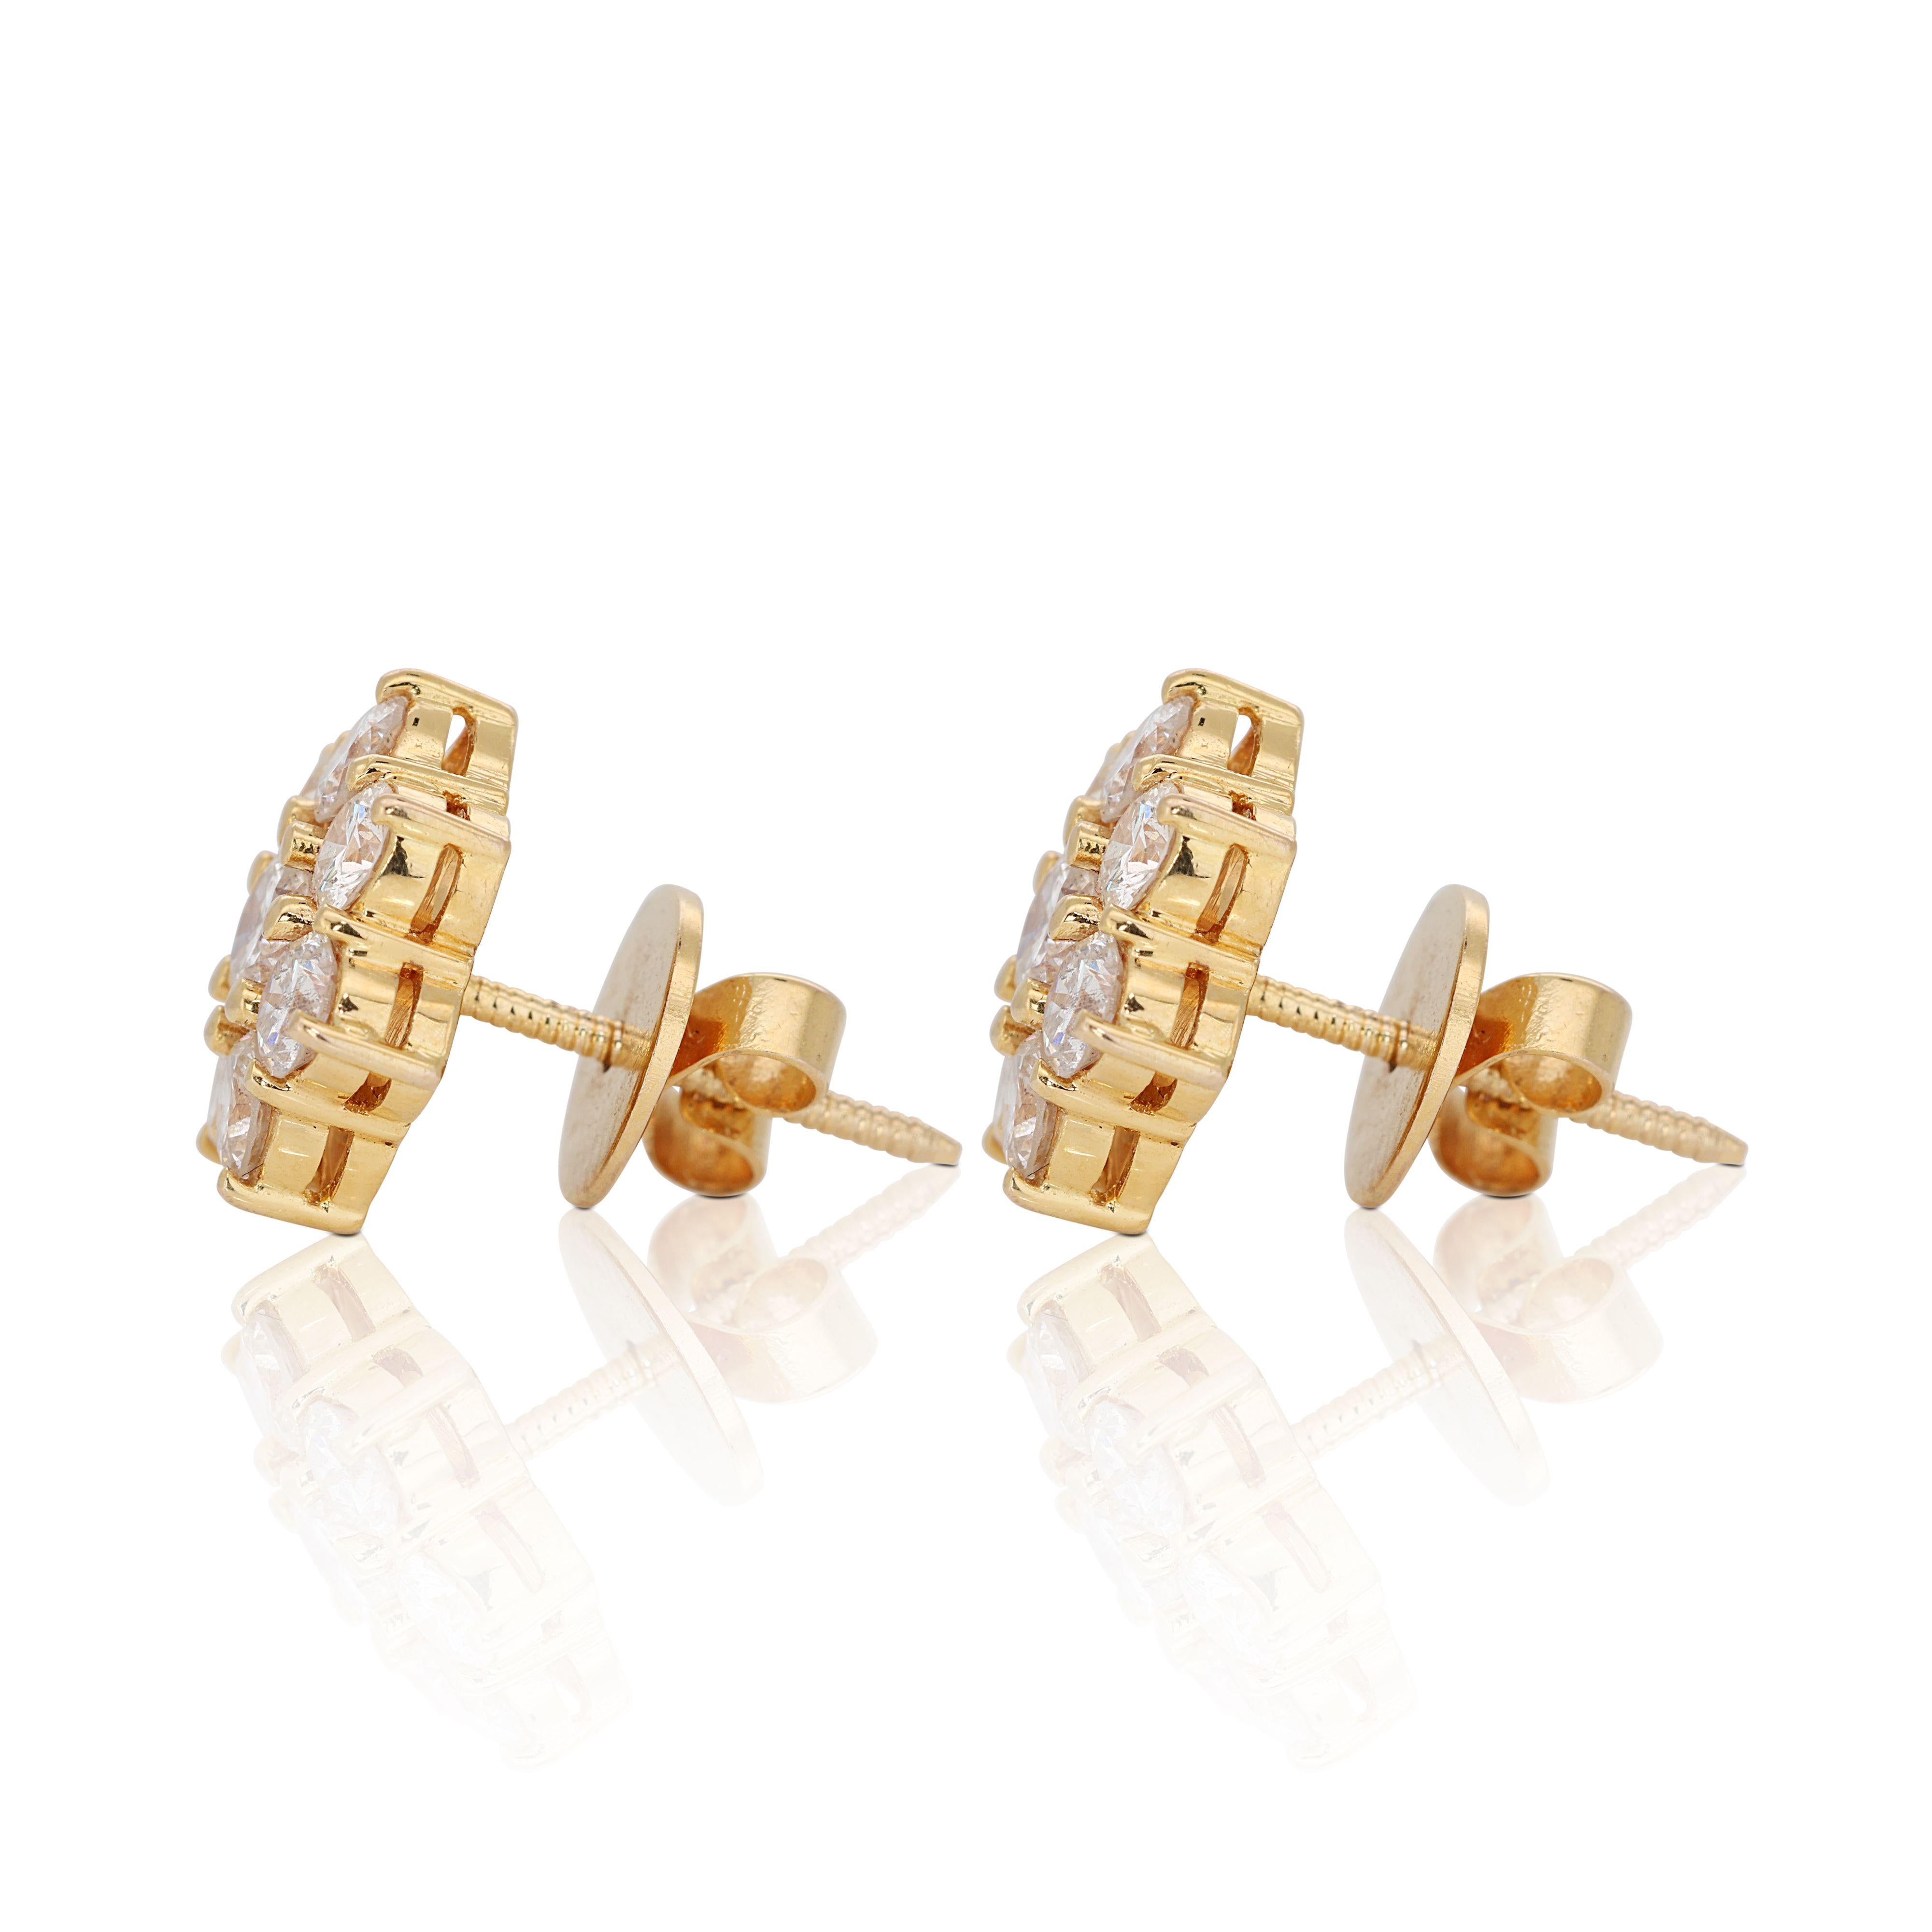 20k Yellow Gold Stud Cluster Earrings 2.22 total carat weight Natural Diamonds For Sale 1